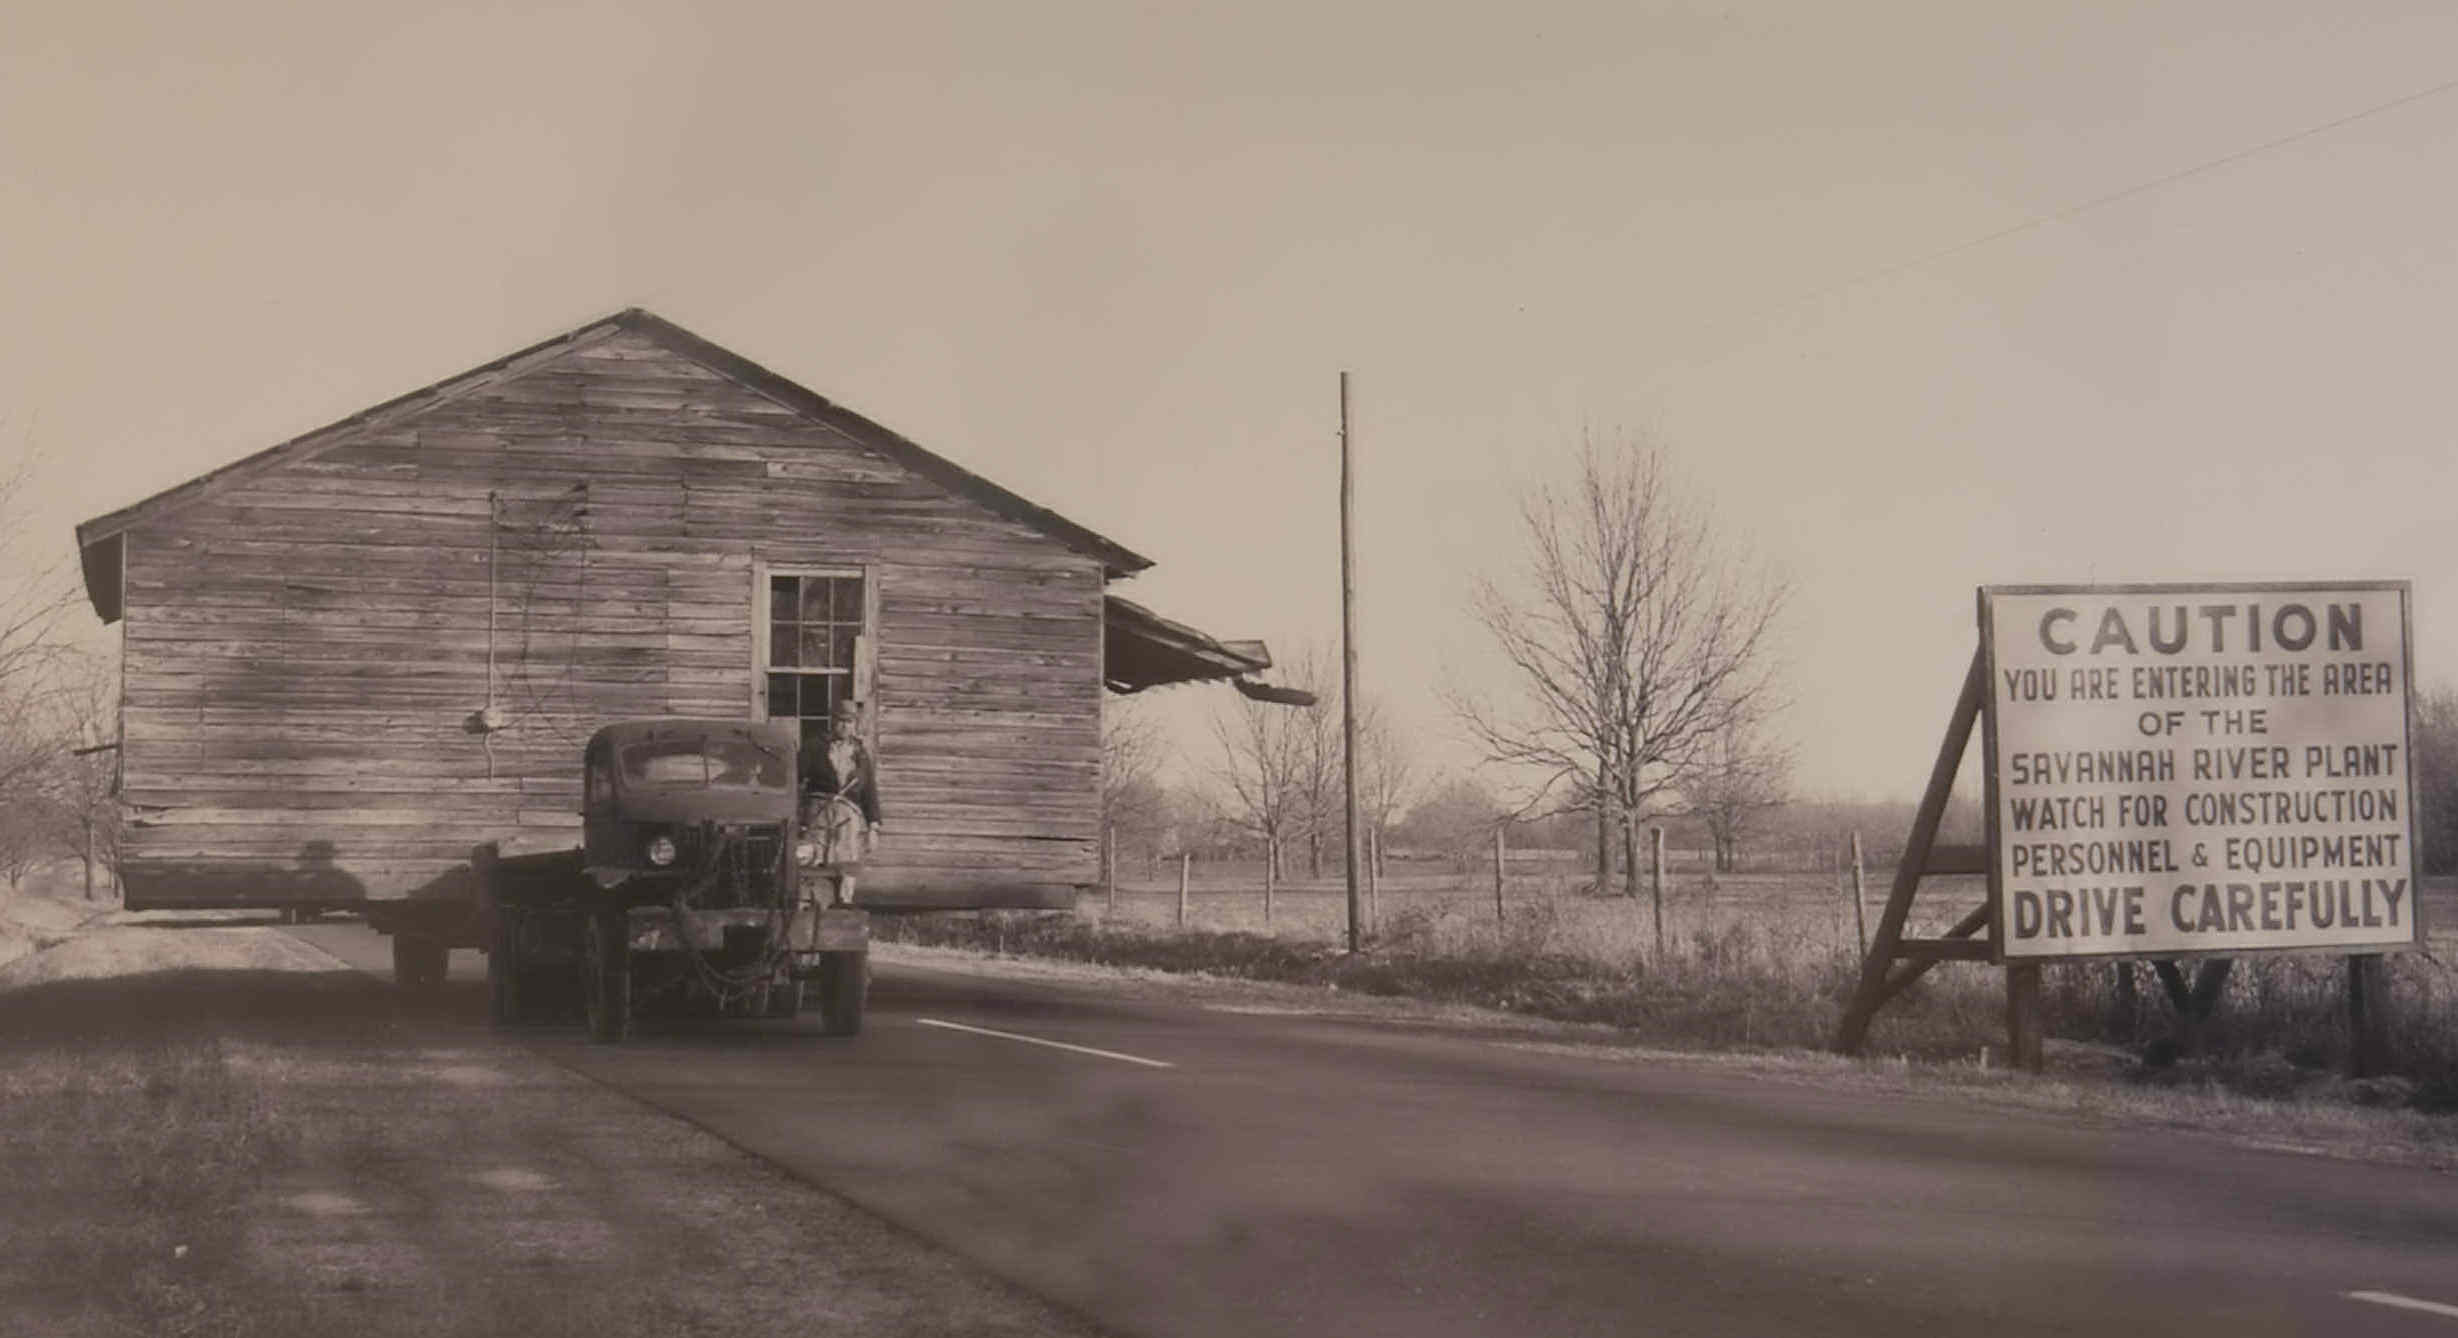 House being moved from site (circa 1951) to make way for construction of SRS facilities. Empty fields are now filled with pine trees planted by U. S. Forestry Service.